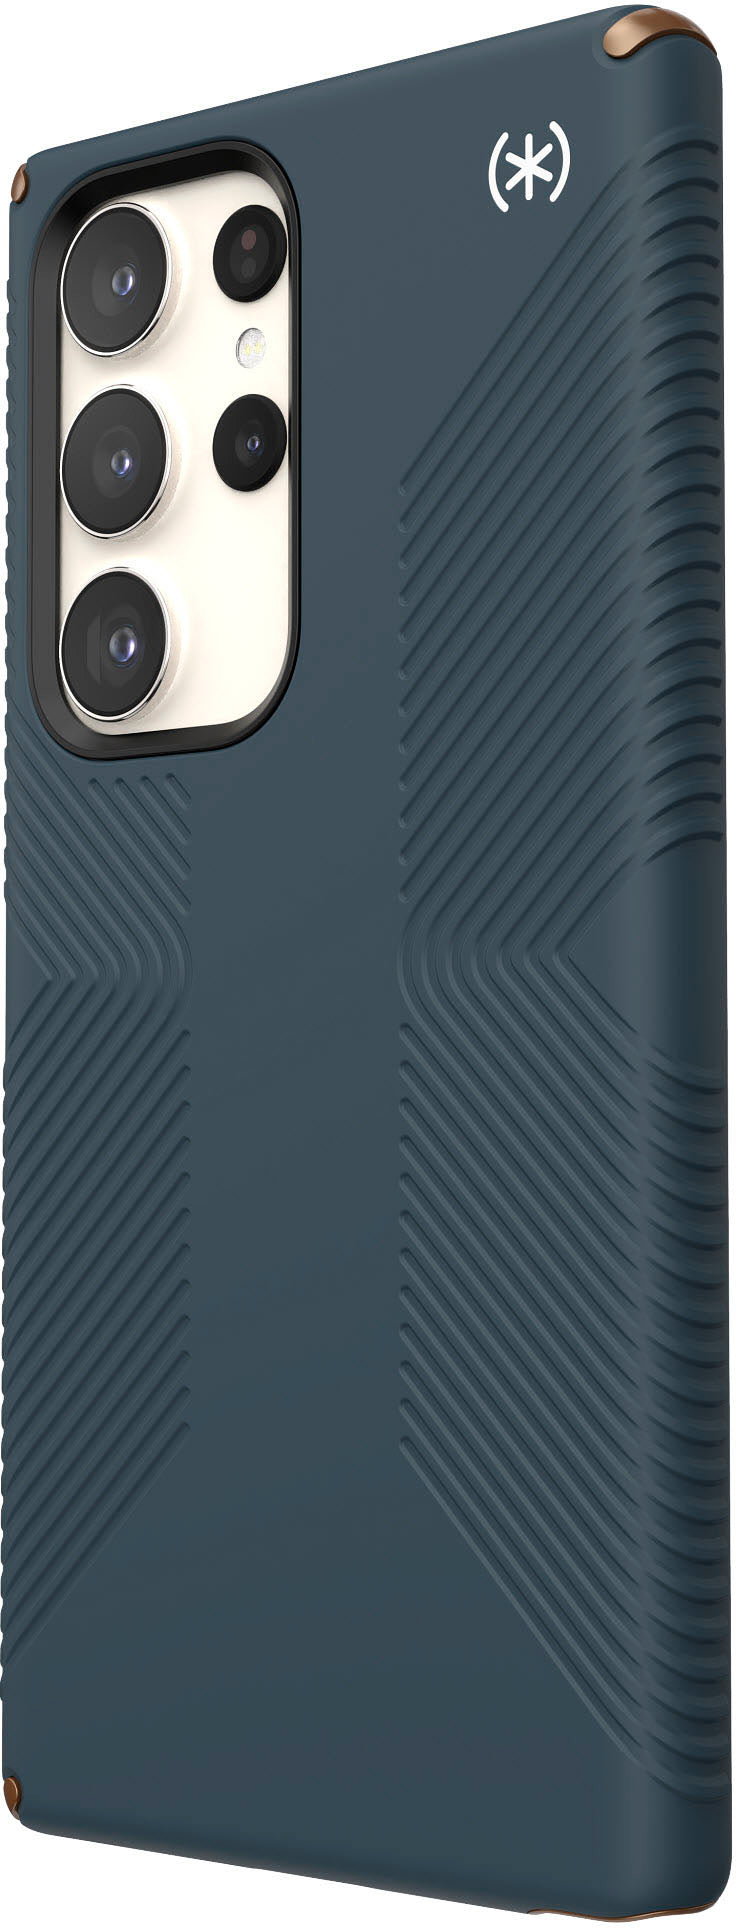 Speck - Presidio2 Grip Case for Samsung Galaxy S23 Ultra - Charcoal Grey/Cool Bronze/White_2